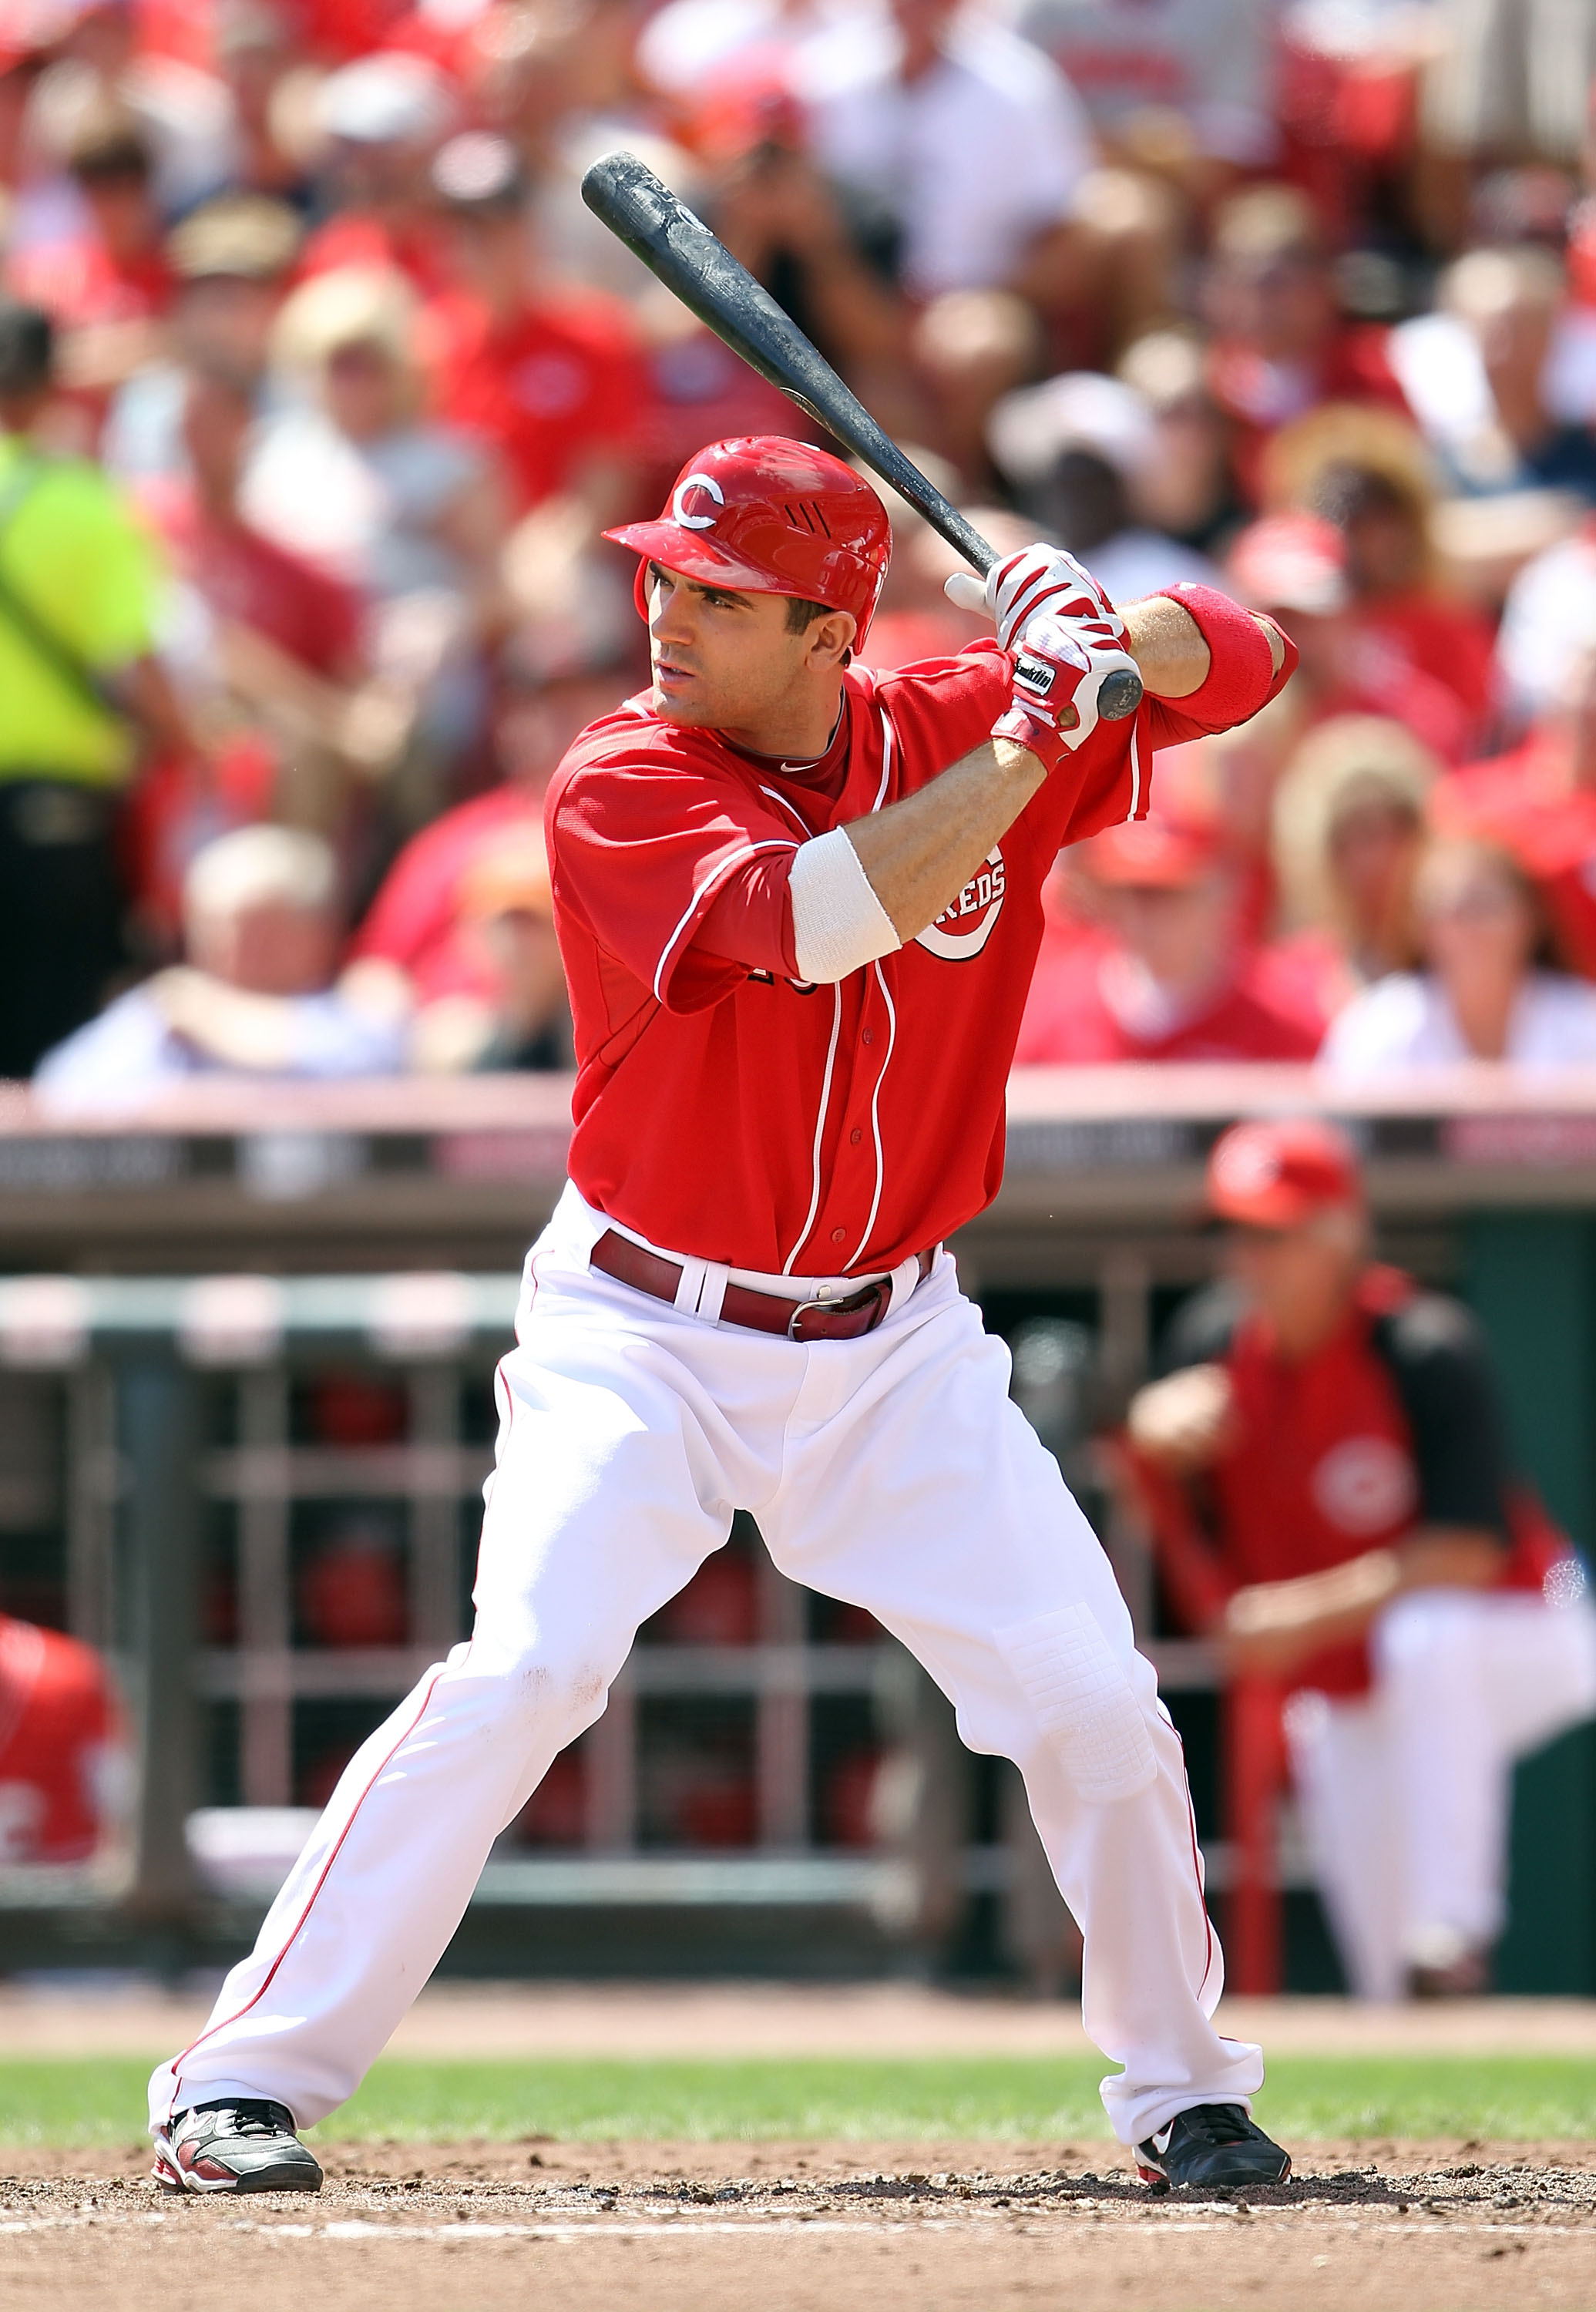 Joey Votto Scores a Home Run for the Cincinnati Reds on His